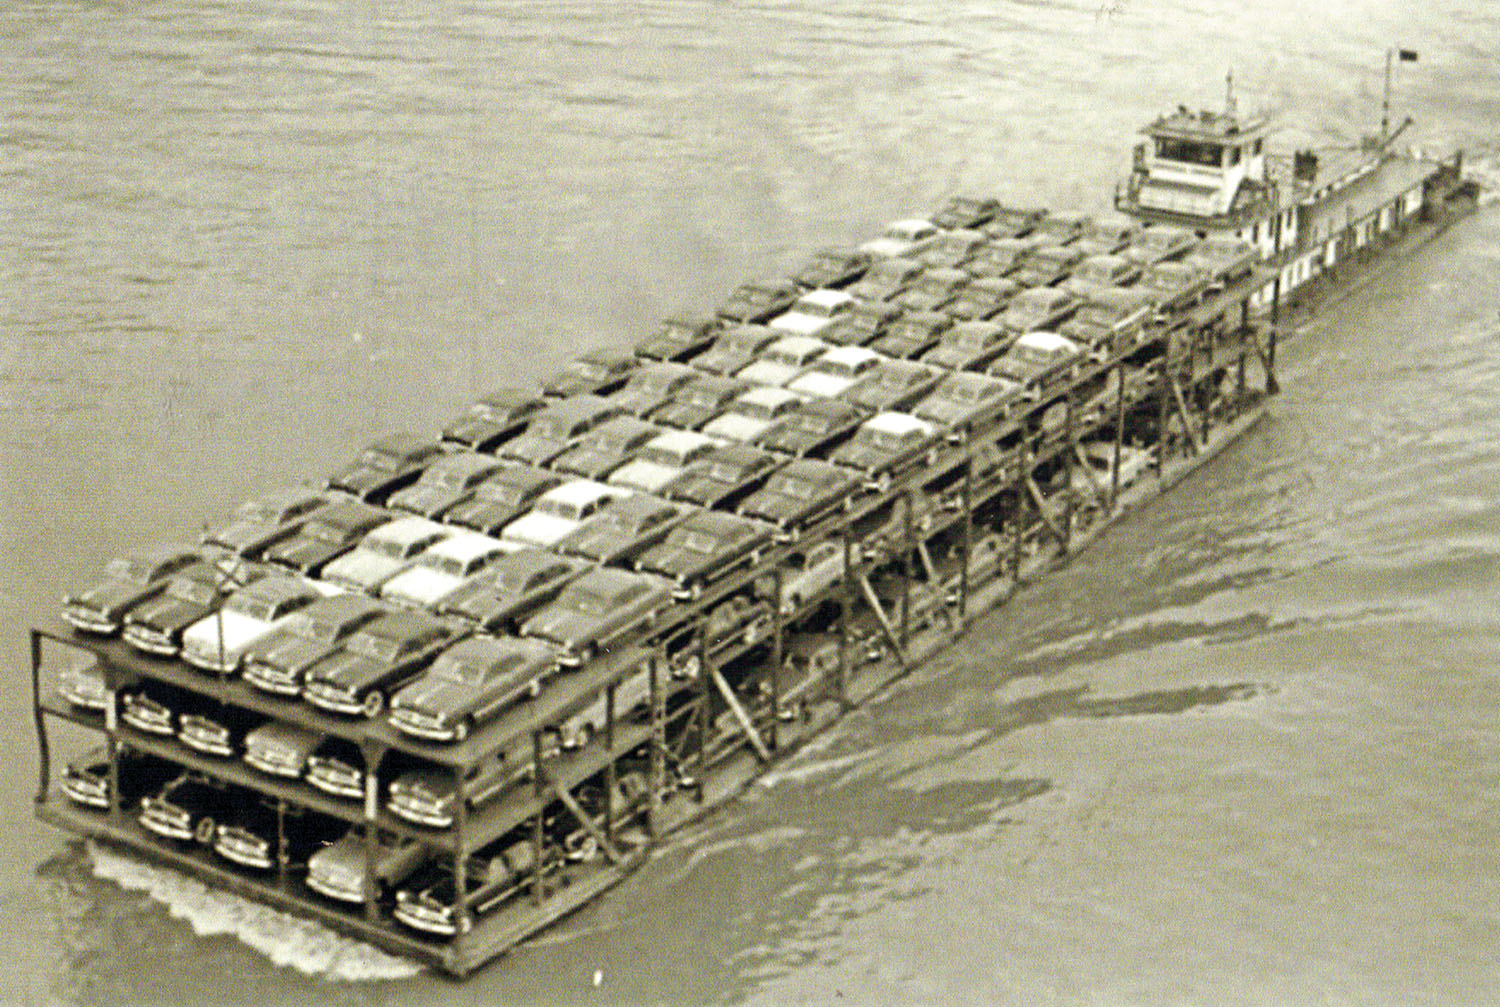 The Commercial Tennessean underway with a tow of Ford automobiles in 1949. (Keith Norrington collection)